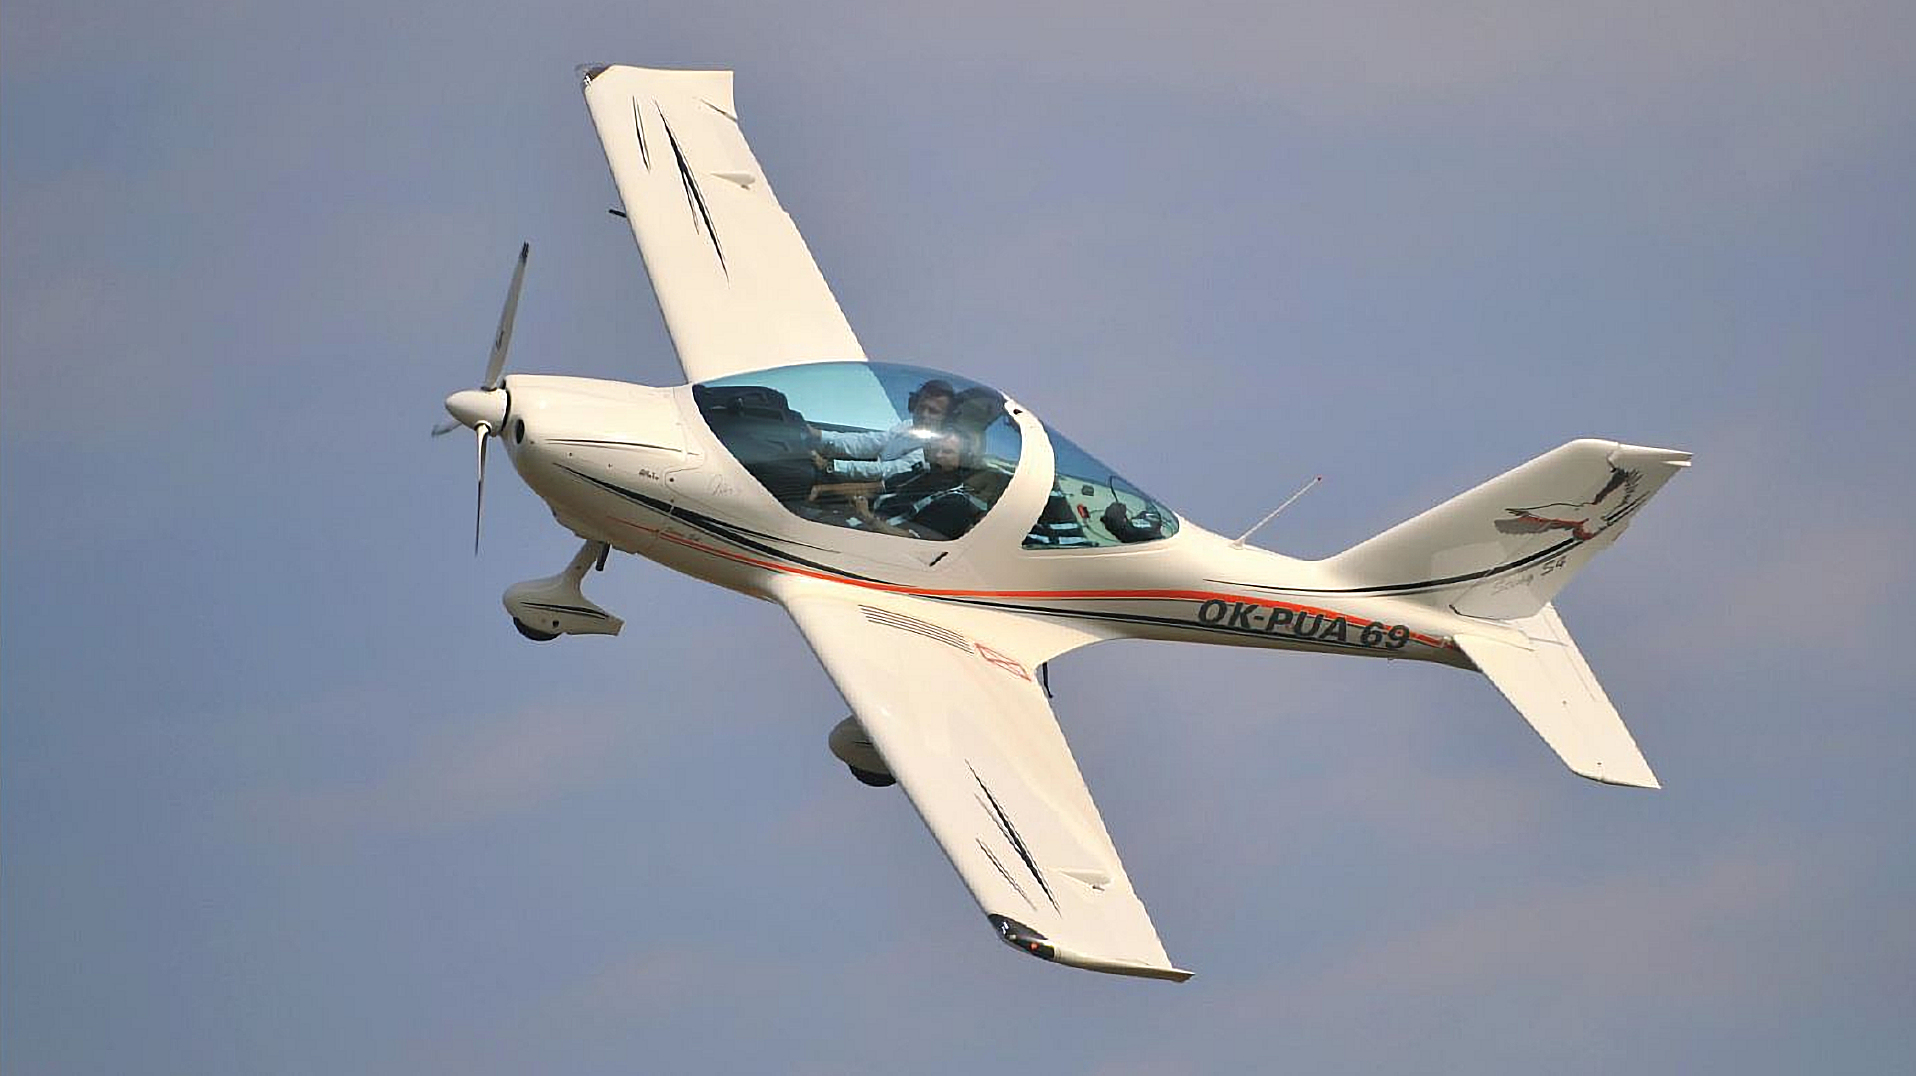 The Saumur Air Club Sting S4 is perfect for learning how to fly an ultralight aircraft